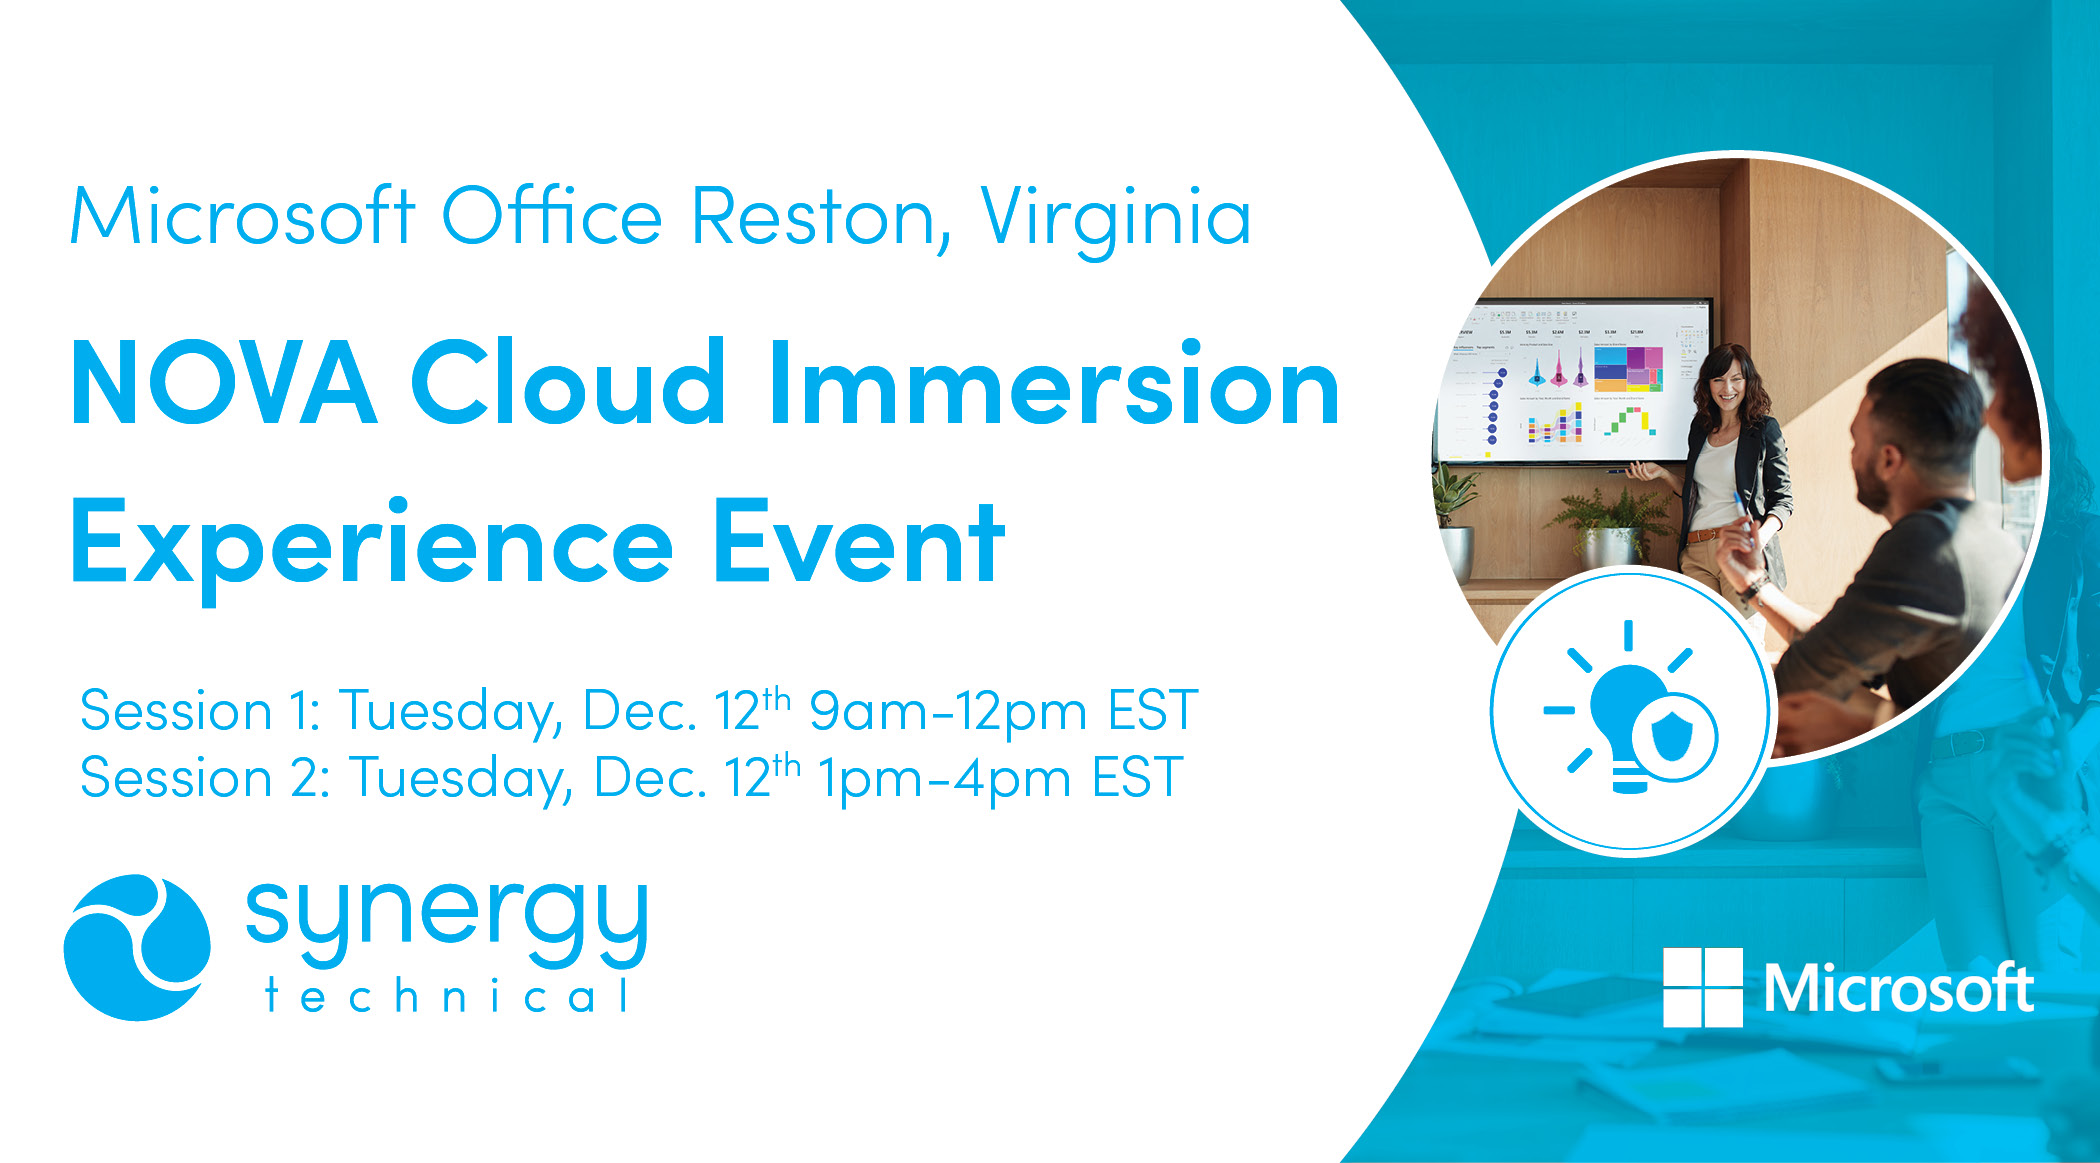 NOVA Cloud Immersion Experience Event